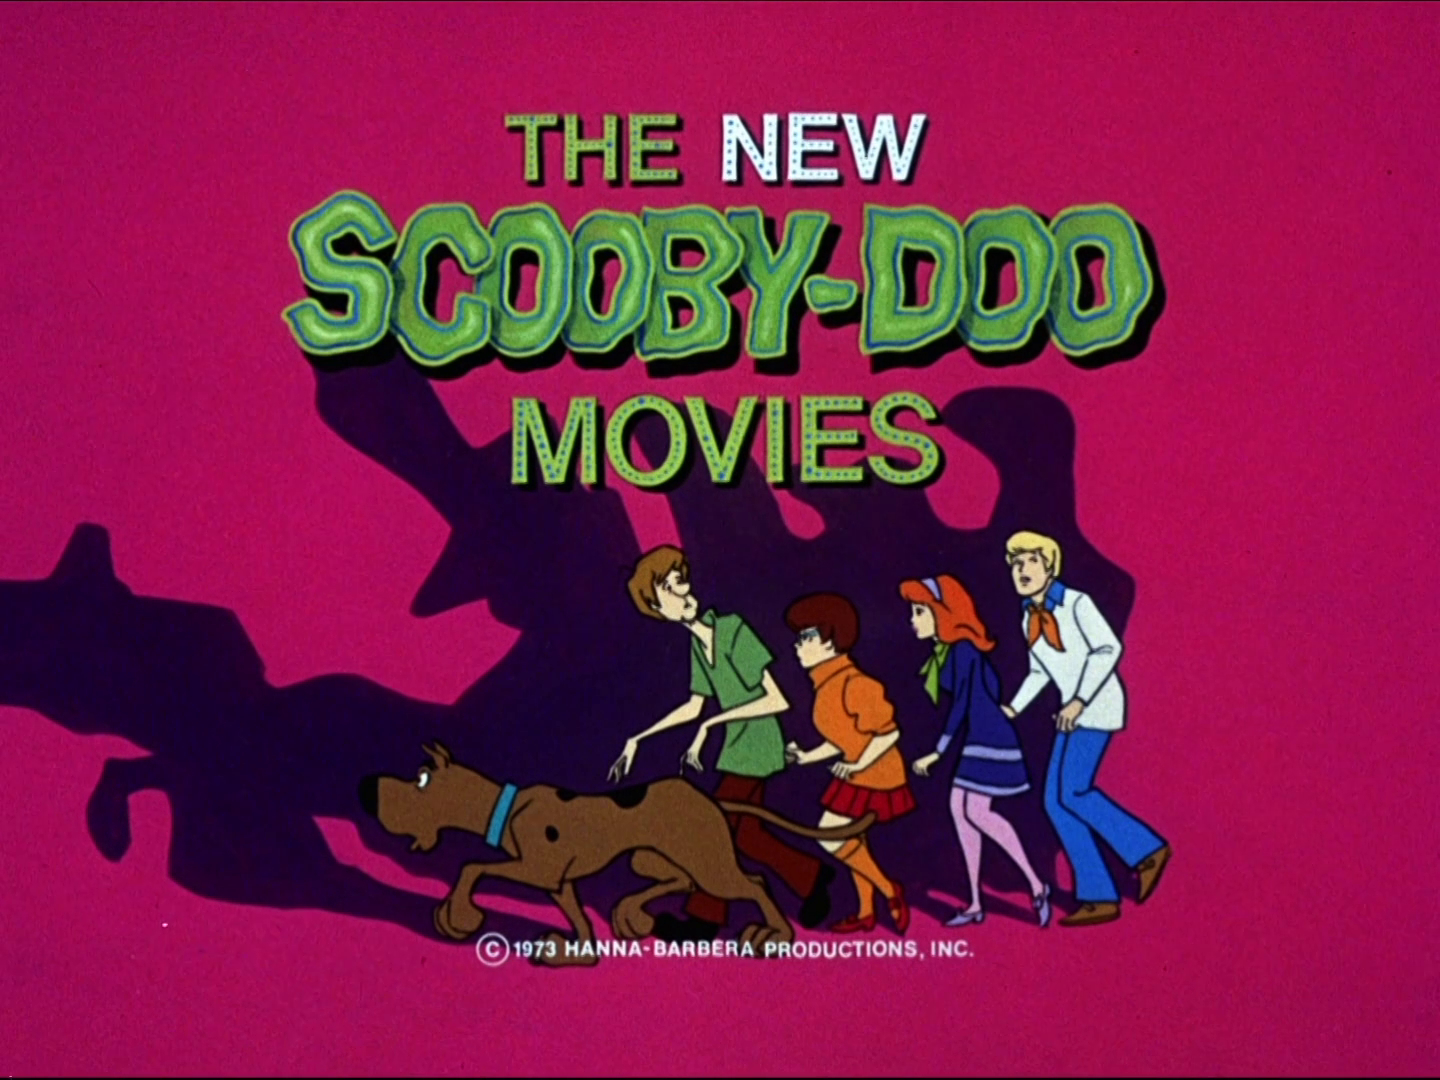 Xem Phim The New Scooby-Doo Movies (Phần 2), The New Scooby-Doo Movies (Season 2) 1973